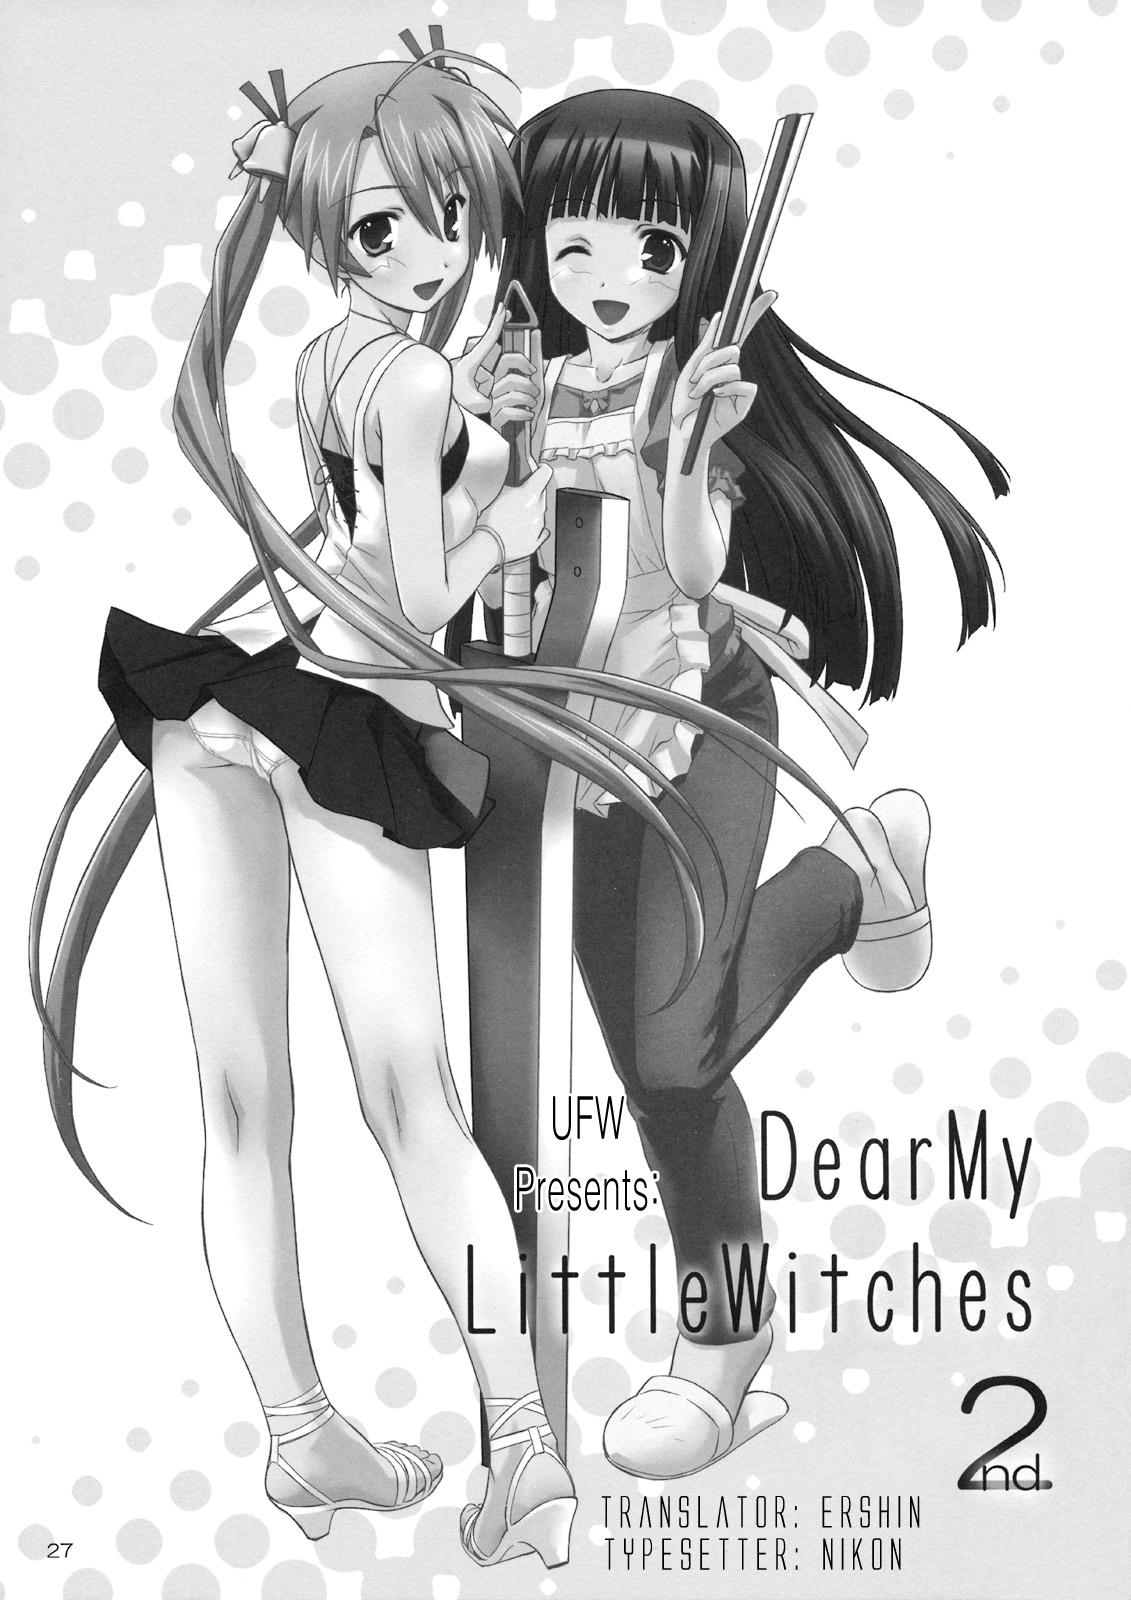 Dear My Little Witches 2nd 25